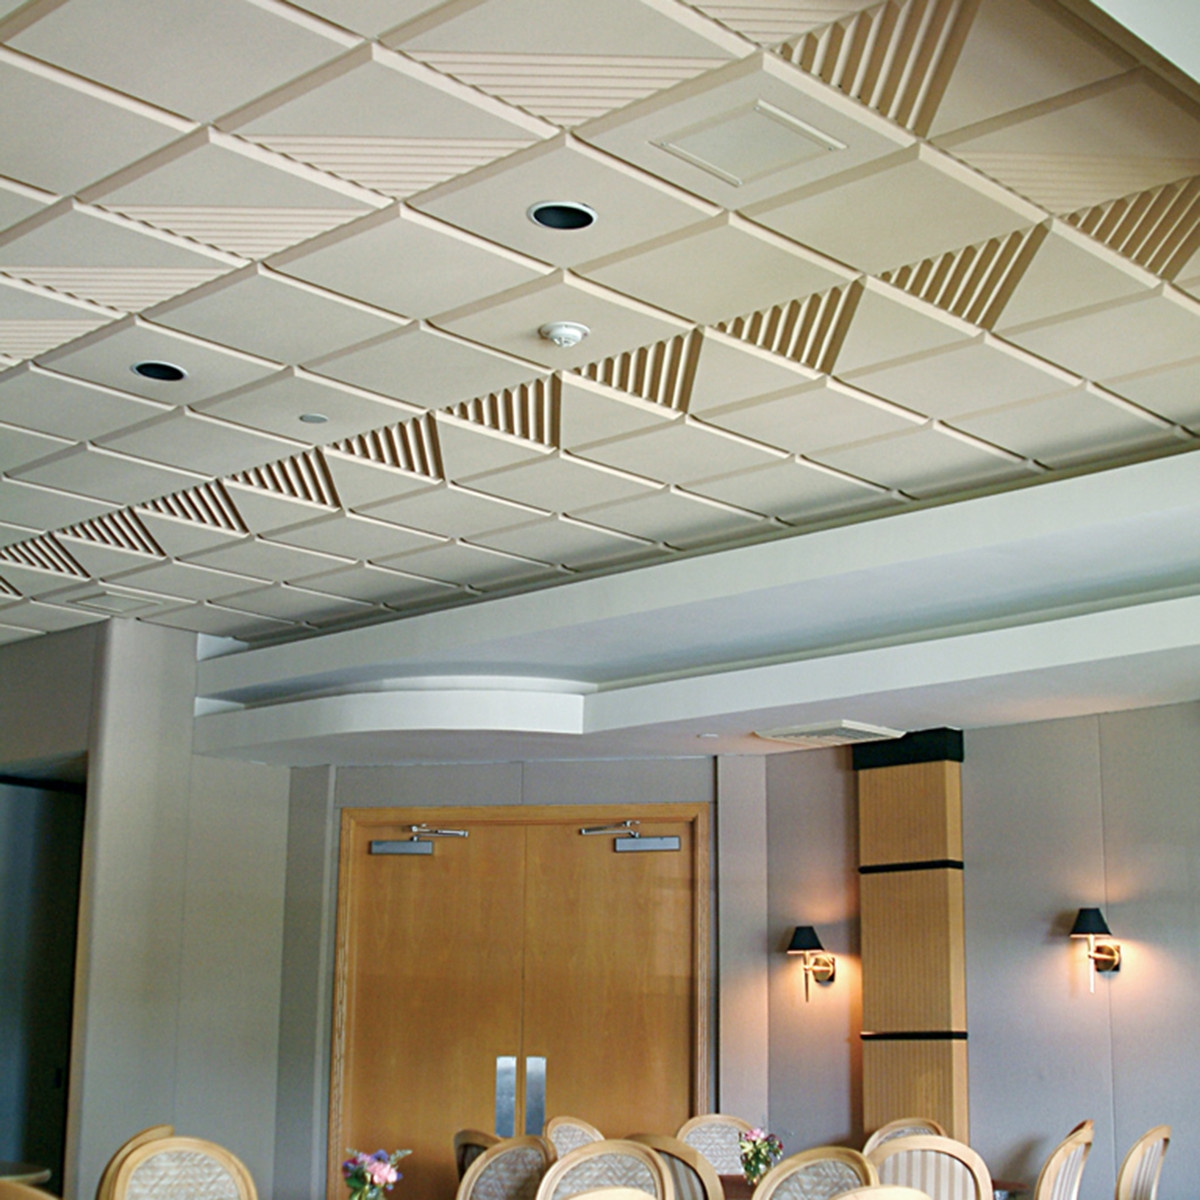 Permalink to Best Ceiling Tiles For Sound Absorption